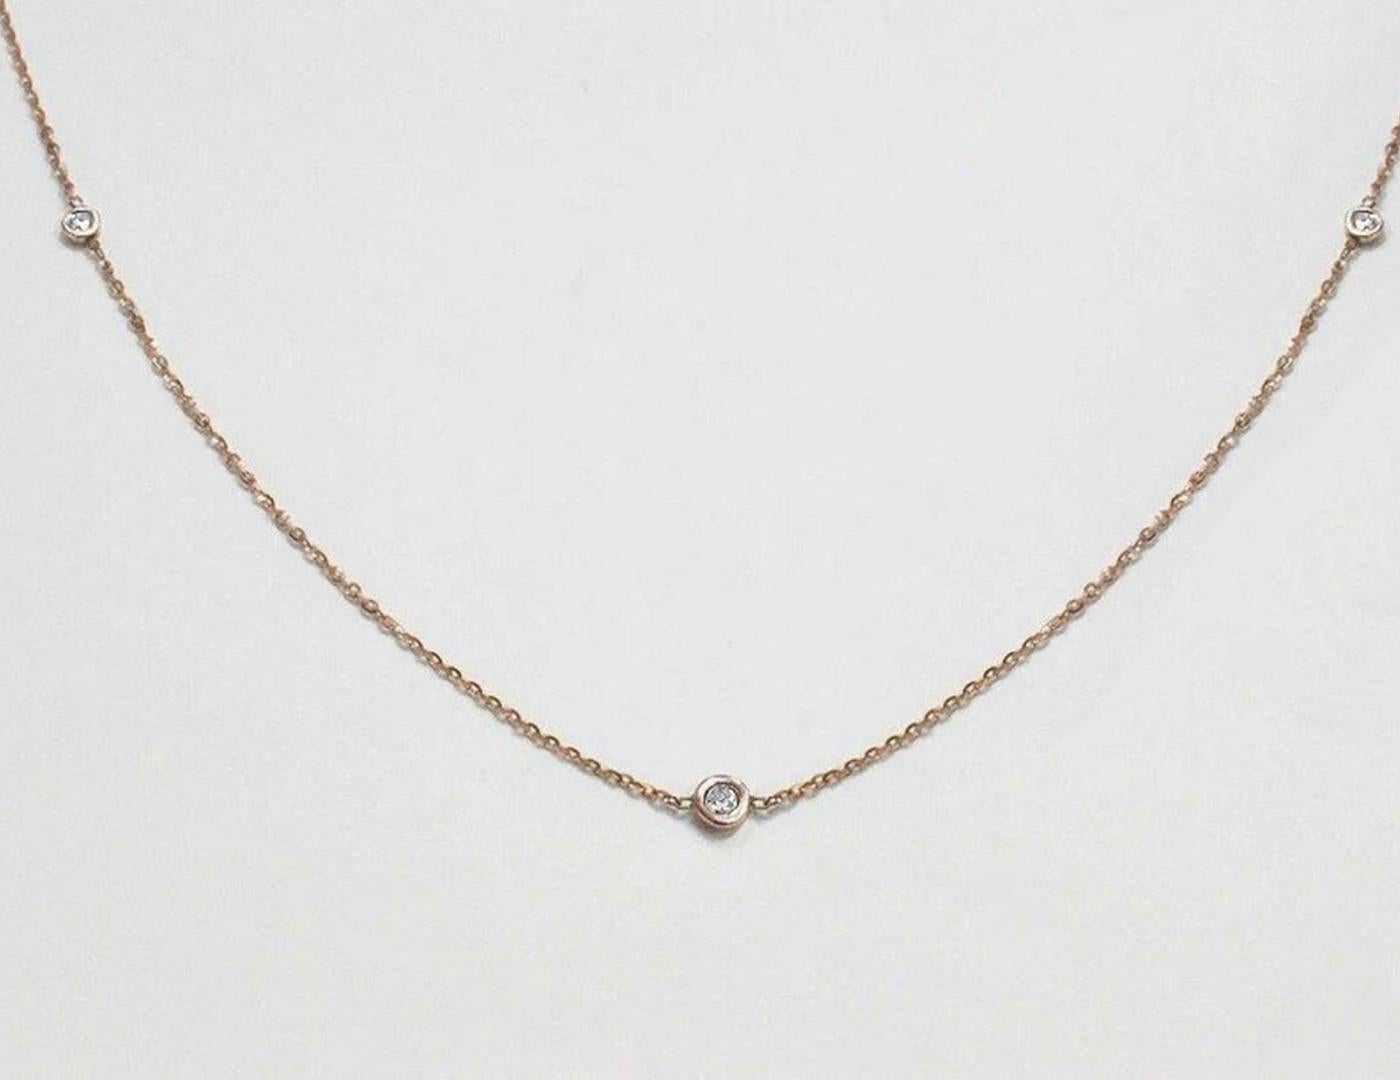 Three Diamond Station Necklace is made of 14k solid gold.
Available in three colors of gold: Yellow Gold / White Gold / Rose Gold.

Natural genuine round cut diamond each diamond is hand selected by me to ensure quality and set by a master setter in